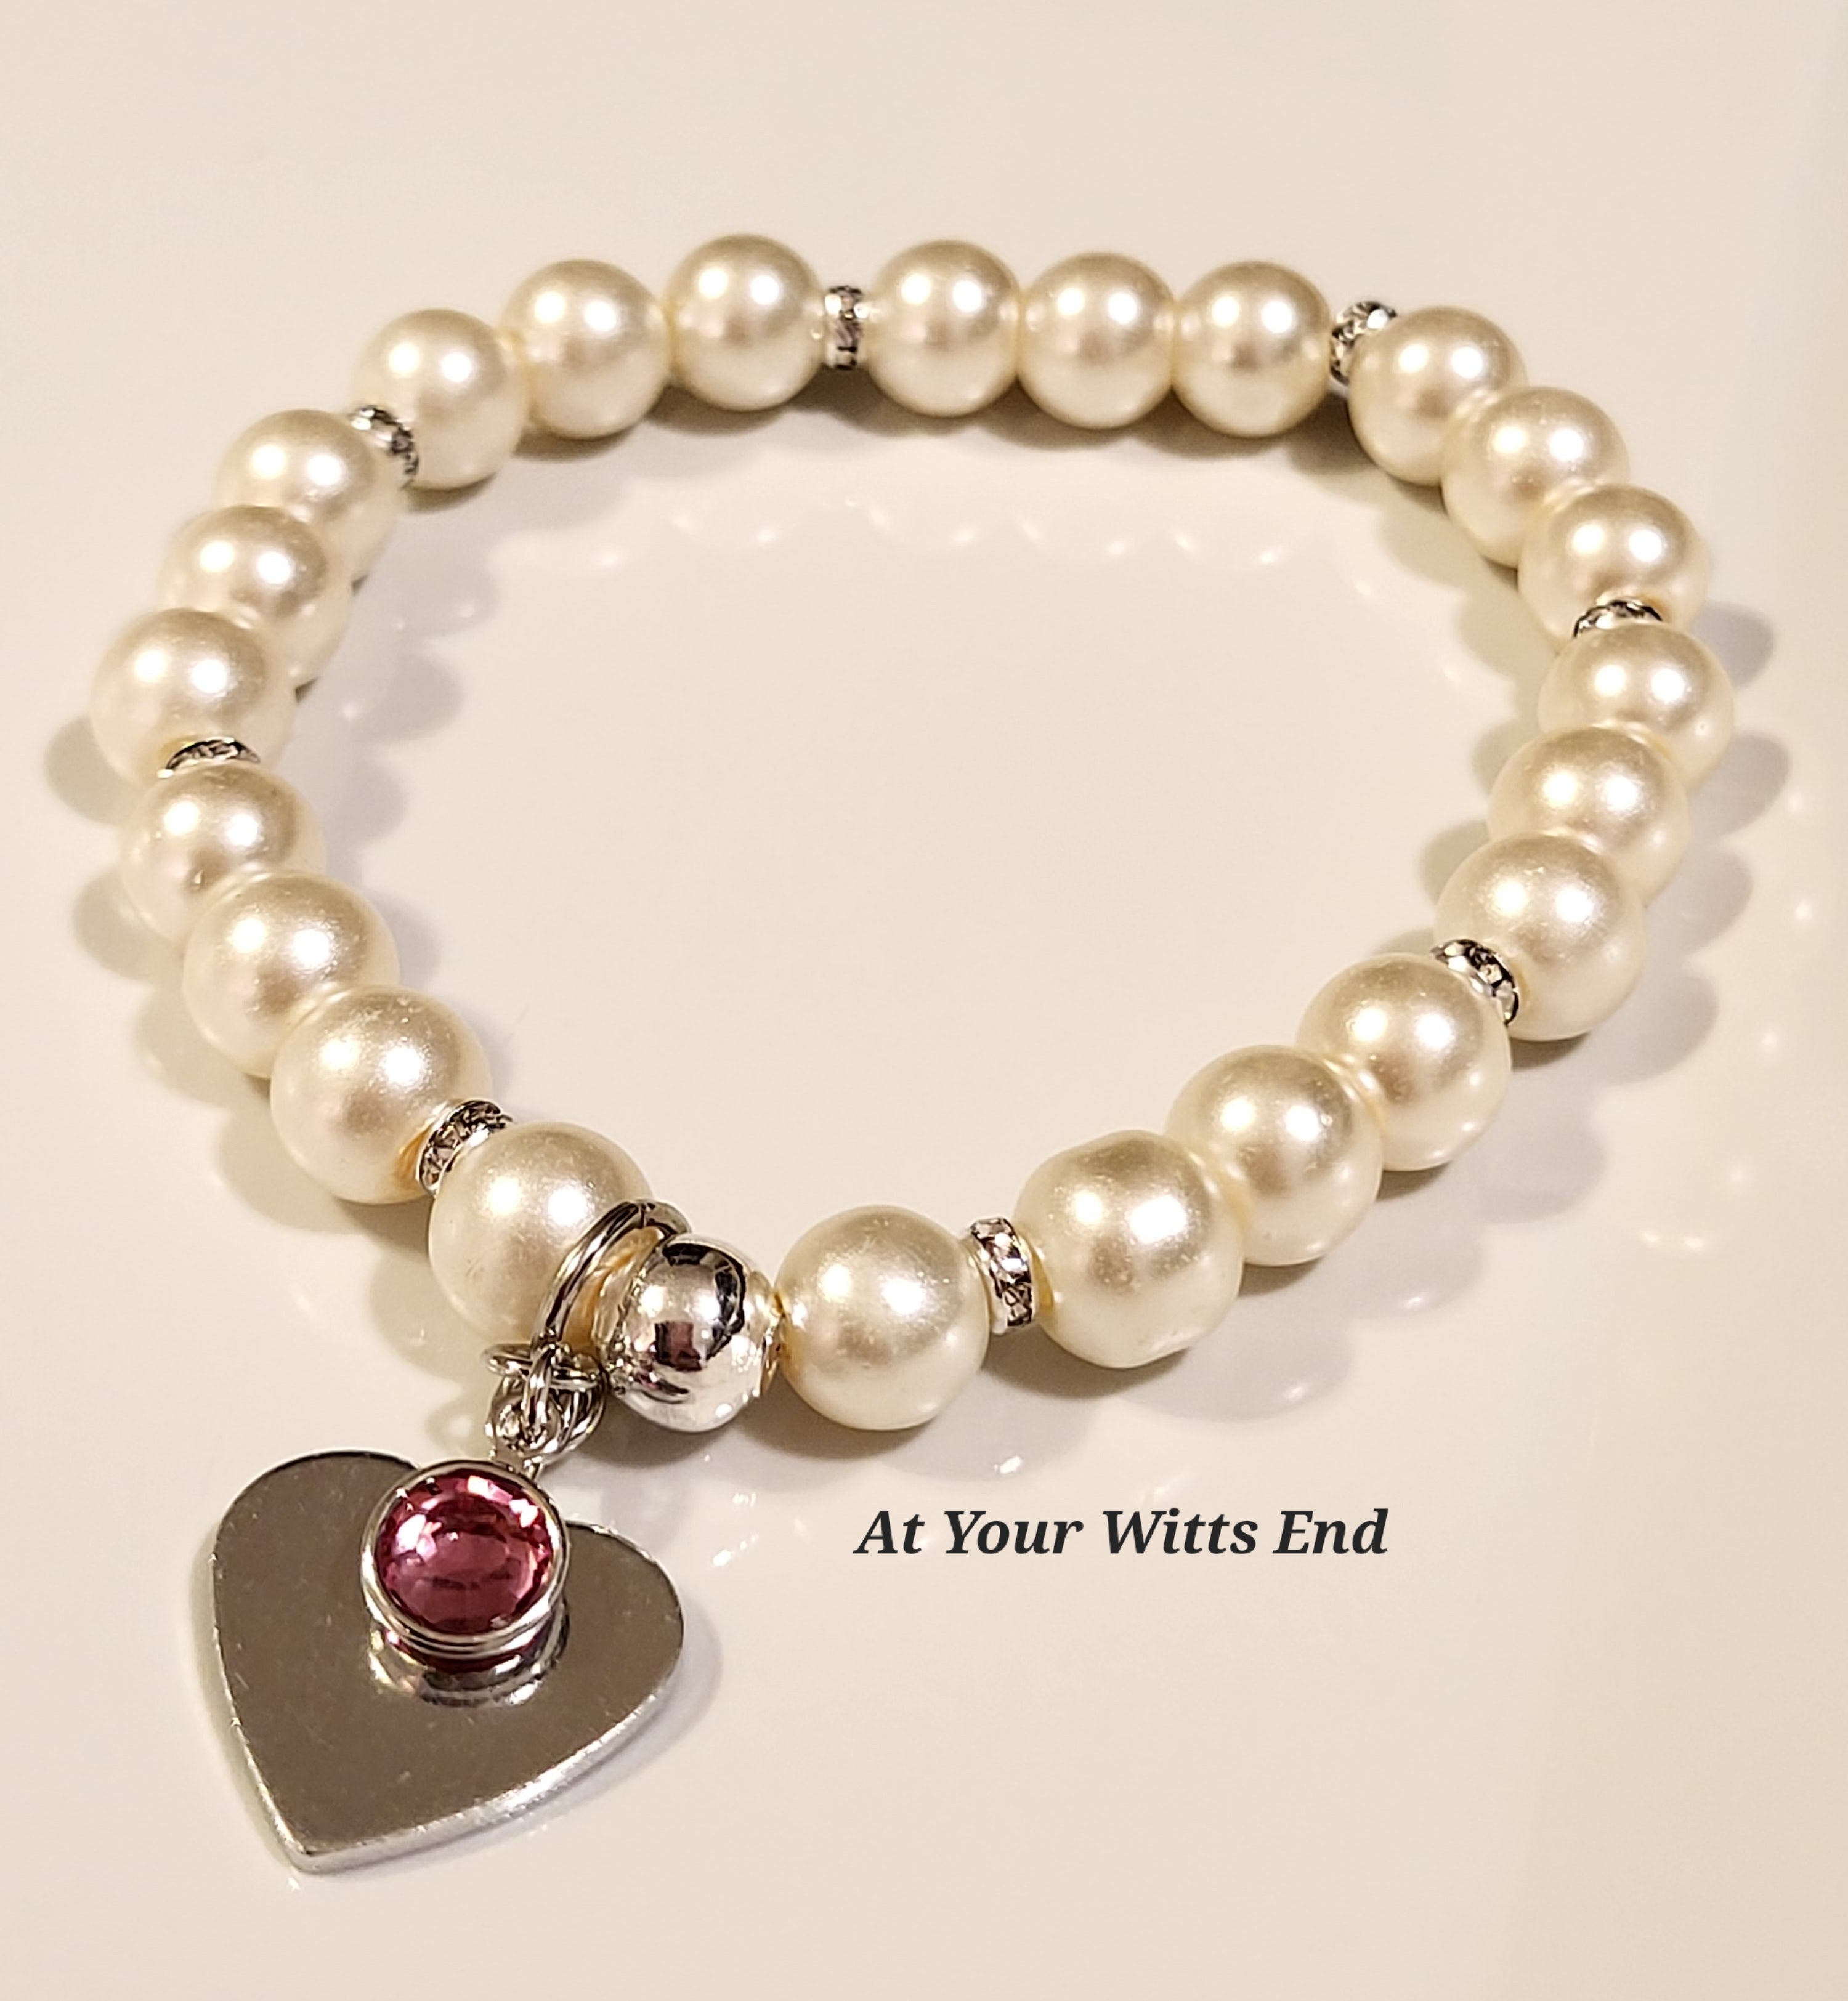 Pearl bracelet pink pearls and pearl charm. Modern pearl jewelry